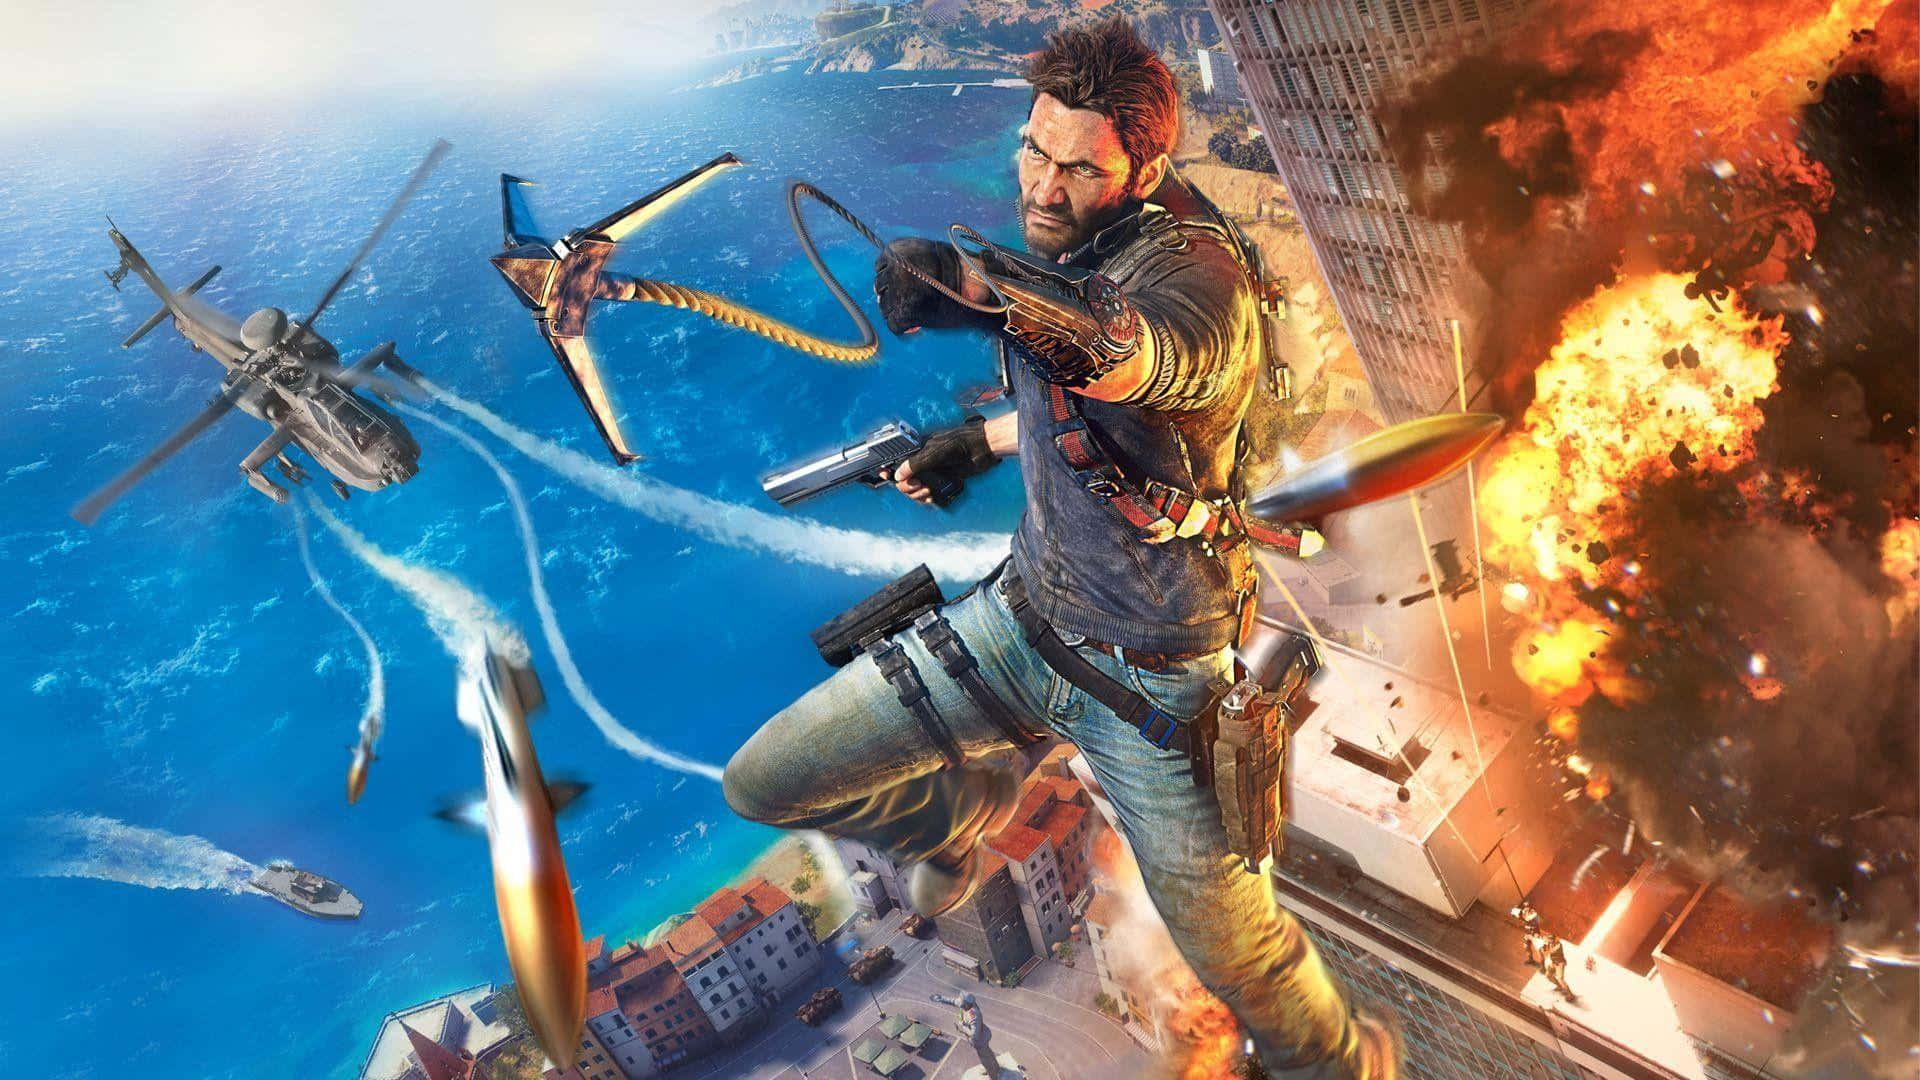 Best Just Cause 4 Background Rico Extending Grappling Hook